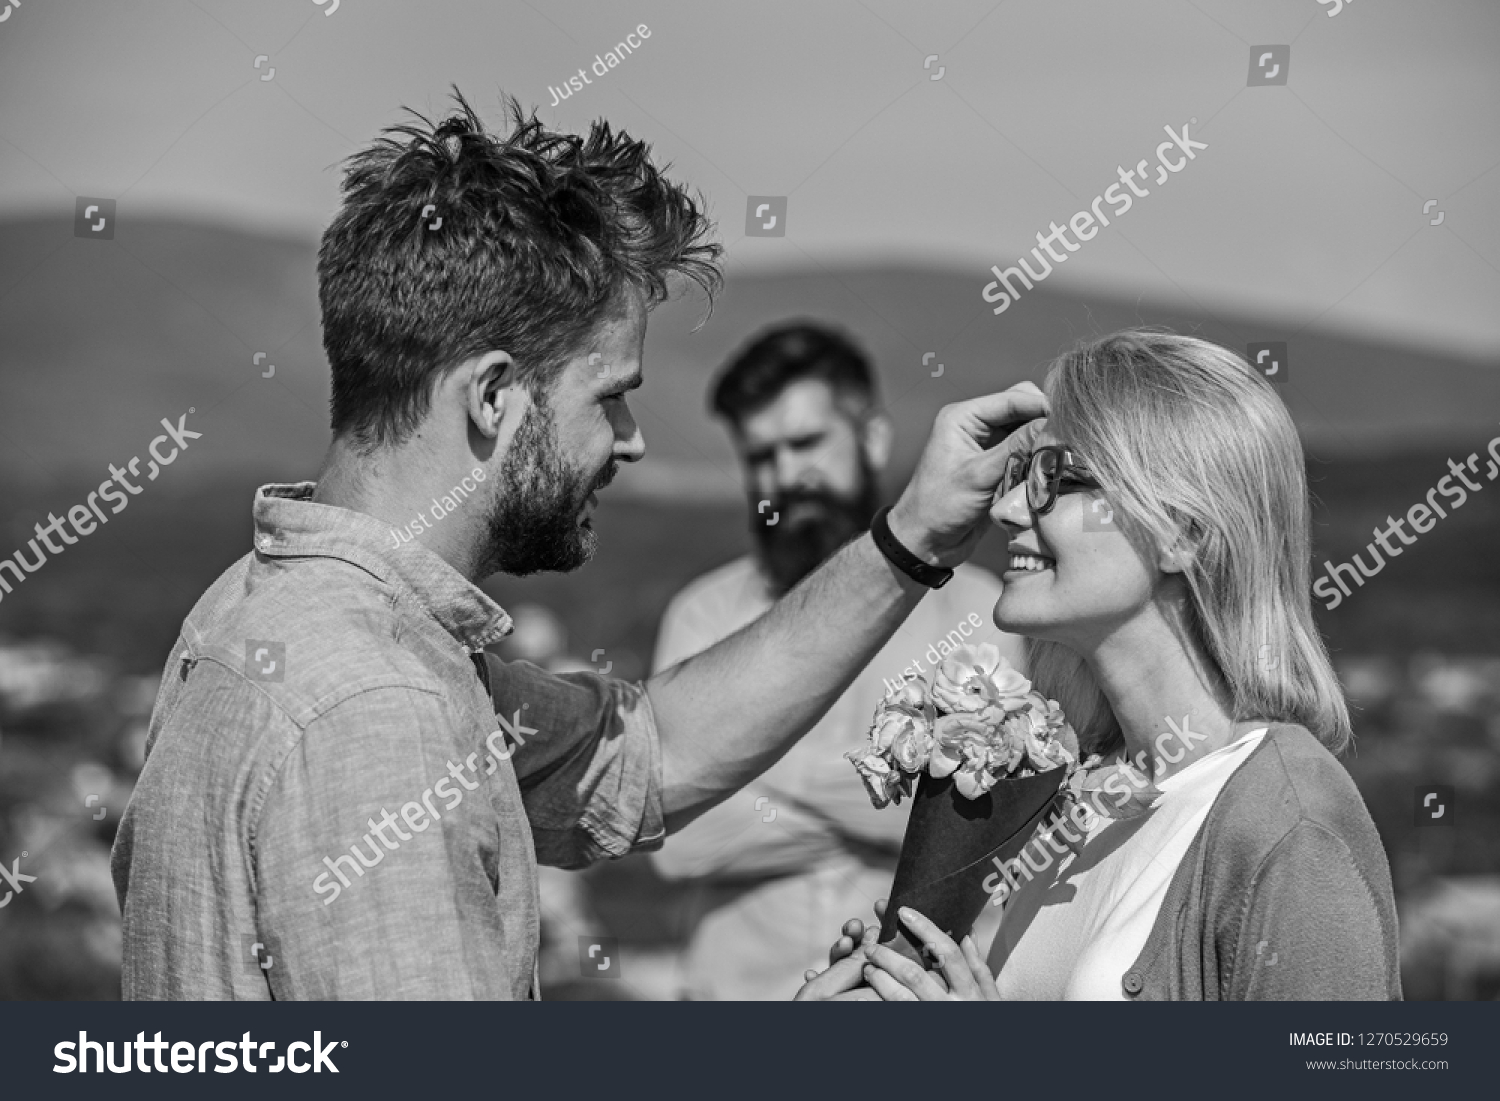 Couple in love dating while jealous husband fixedly watching on background. Unrequited love concept. Lovers meeting outdoor flirt romance relations. Couple romantic date lover present bouquet flowers. #1270529659